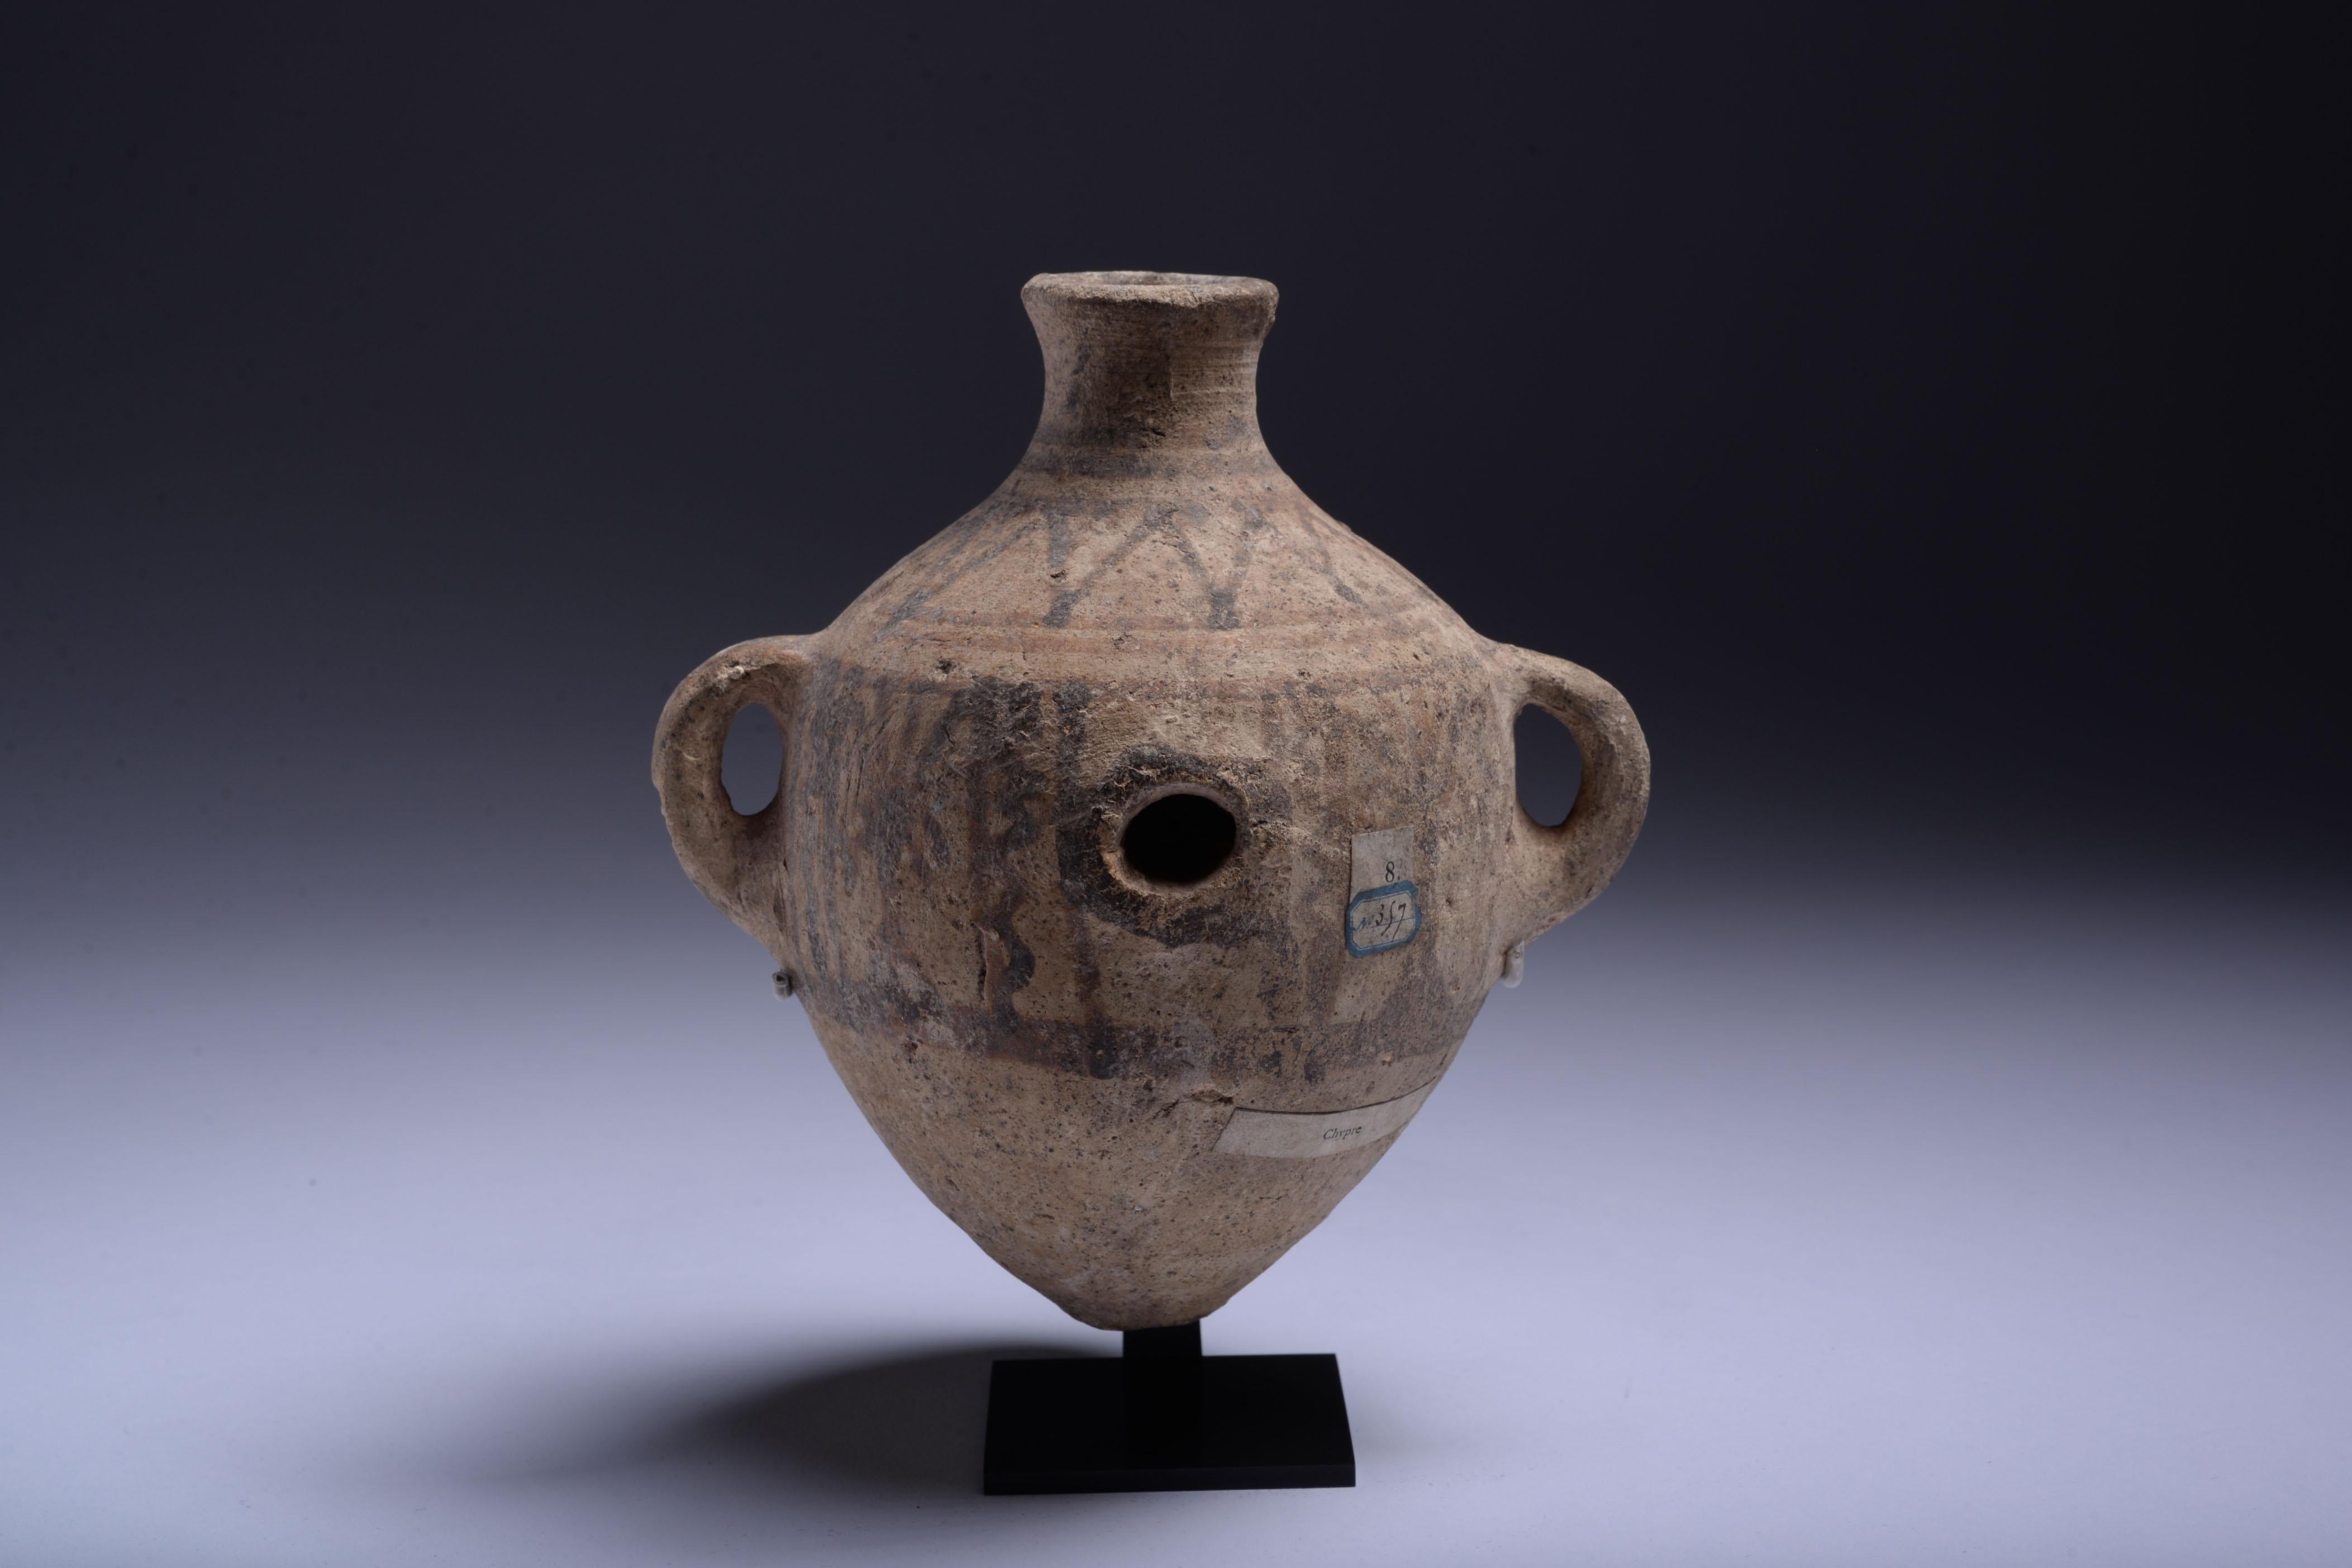 Cypriot Bronze Age Terracotta Vessel
circa 1850-1650 B.C.

Belonging to a style known as White Painted Ware, this attractive teardrop-shaped vessel is a prime example of the dynamism and playfulness that characterises the works of the ancient